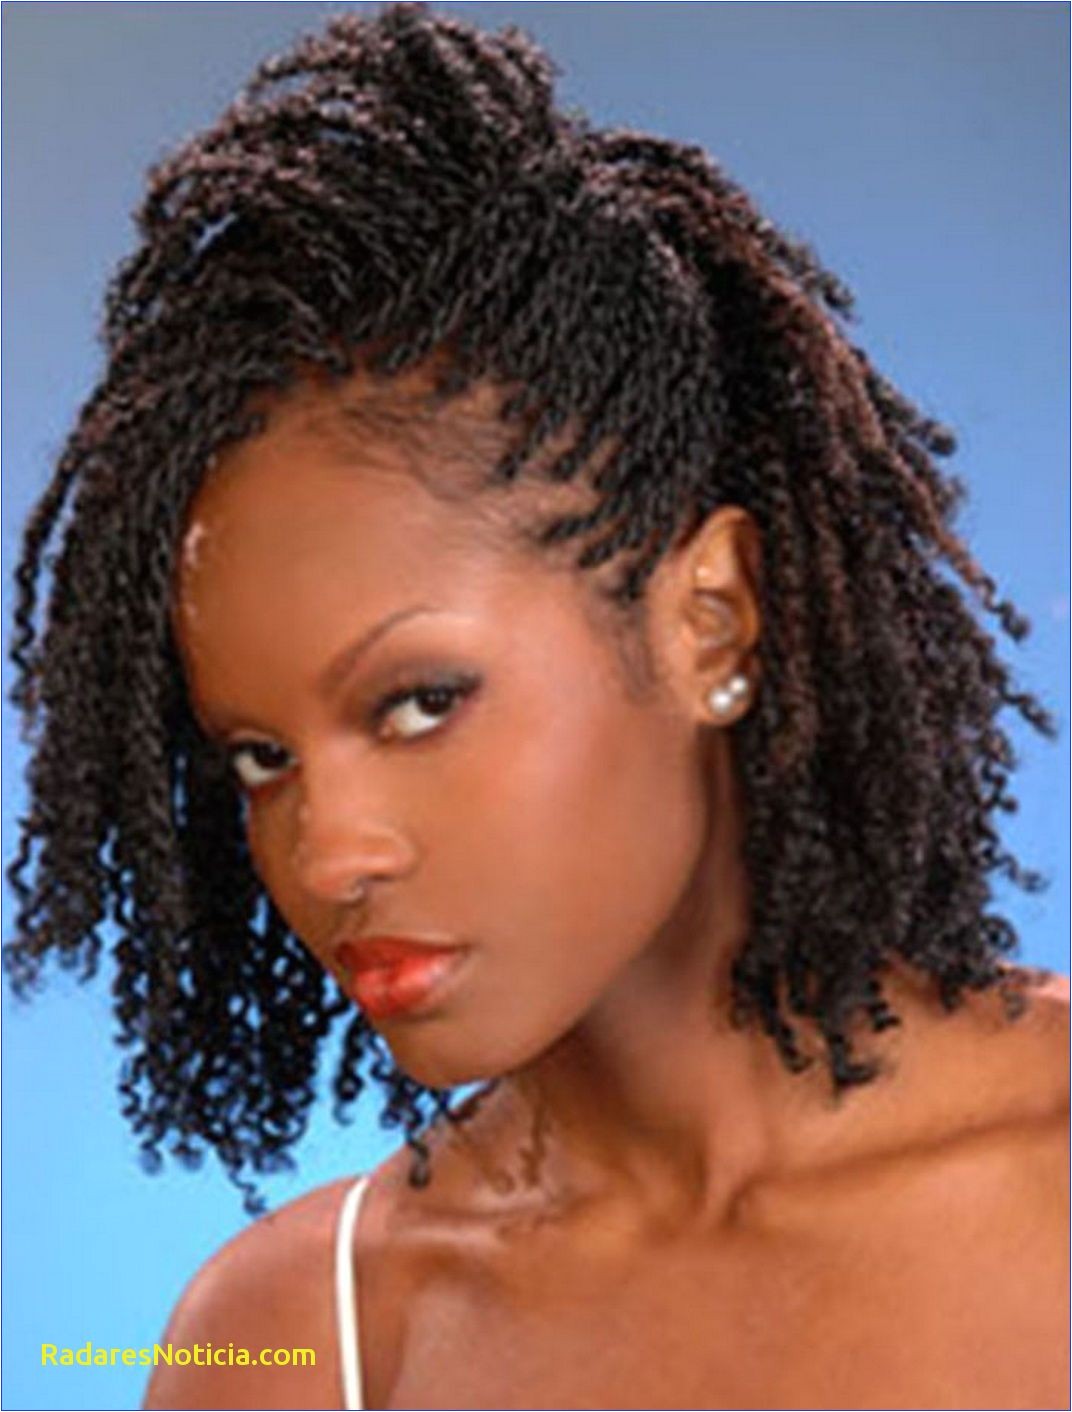 French Braids Hairstyles for African American African American Braided Hairstyles Hairstyles African American